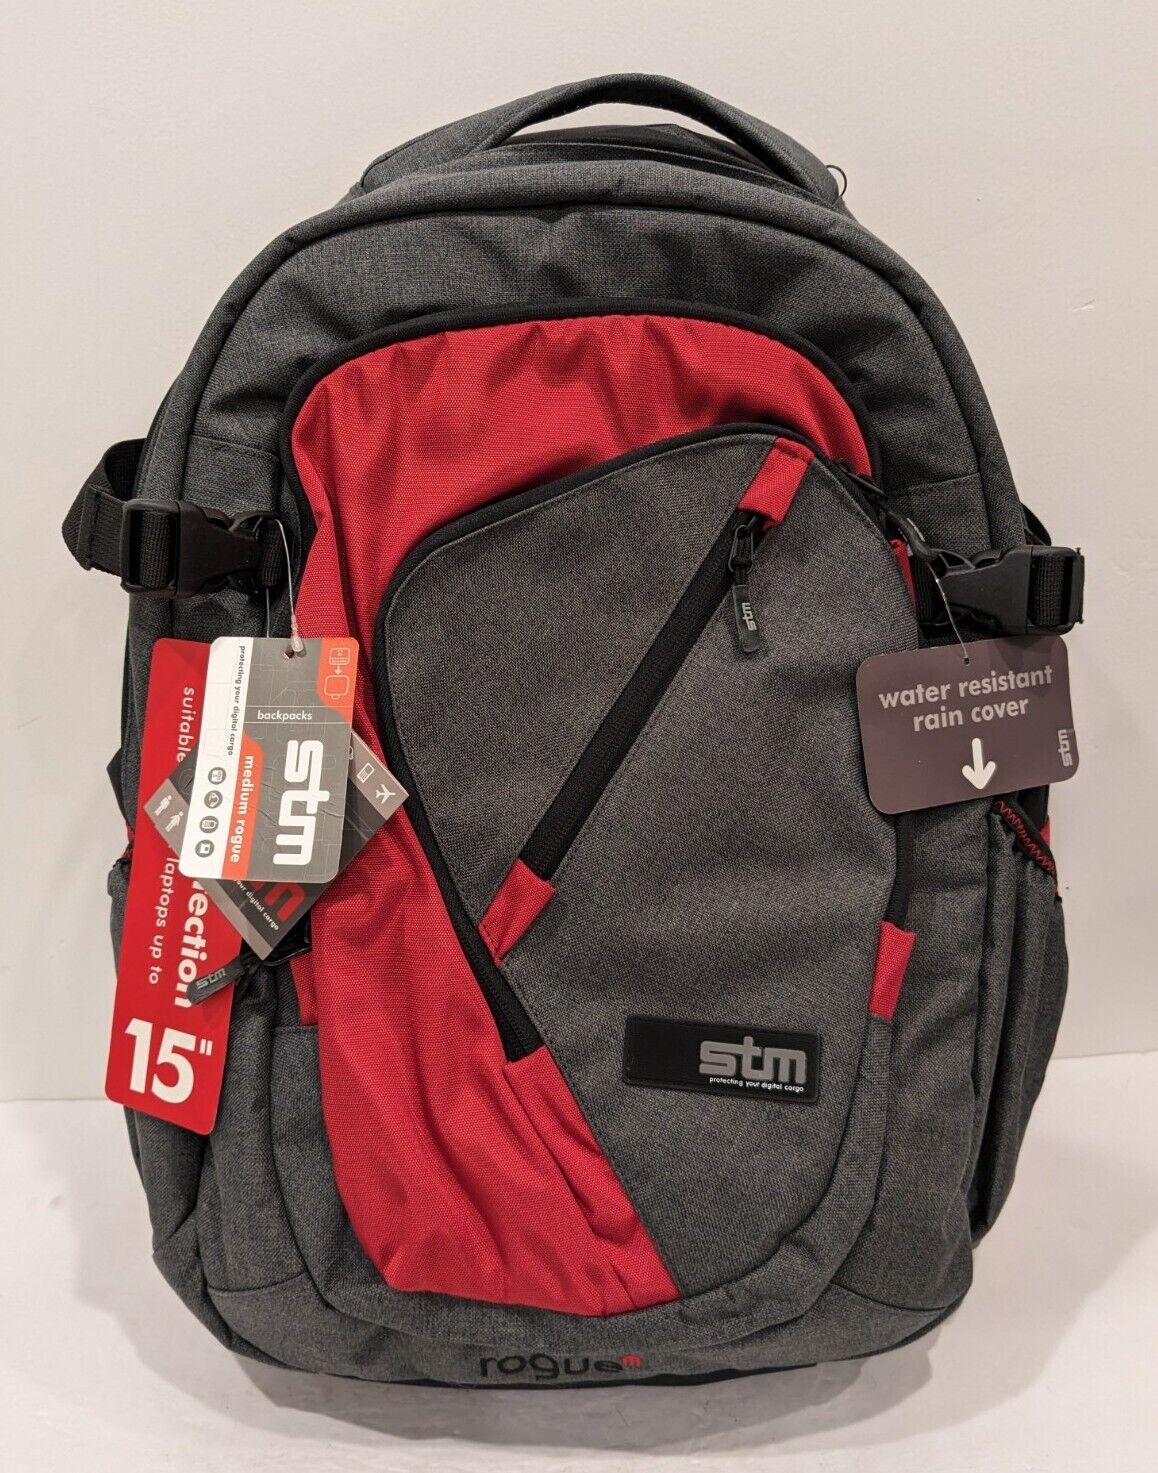 STM Rogue Laptop Backpack | Water Resistant | Grey Marle/Red New With Tags